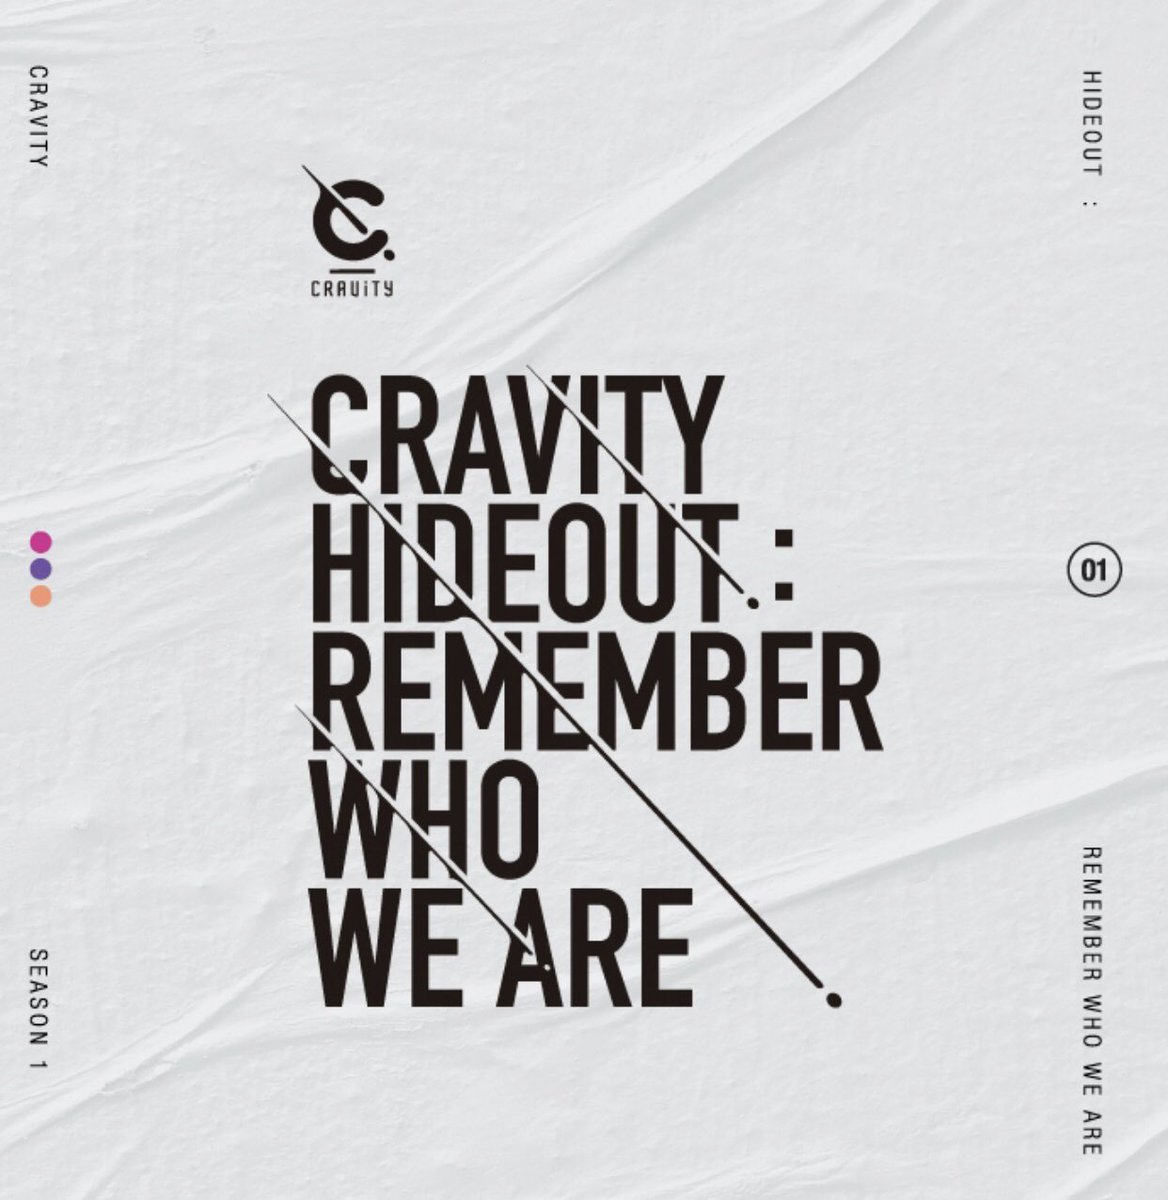 [ Non-profit MY G.O | PREORDER] CRAVITY SEASON 1 <HIDEOUT> REMEMBER WHO WE ARE Album RM69 each version + poster provided (included EMS) RM8/WM, RM12/EM OR combine shipment with items bought at  @Petite_SeoulDeadline: 12/4  https://forms.gle/yTAiCBJYsYZXUJF56